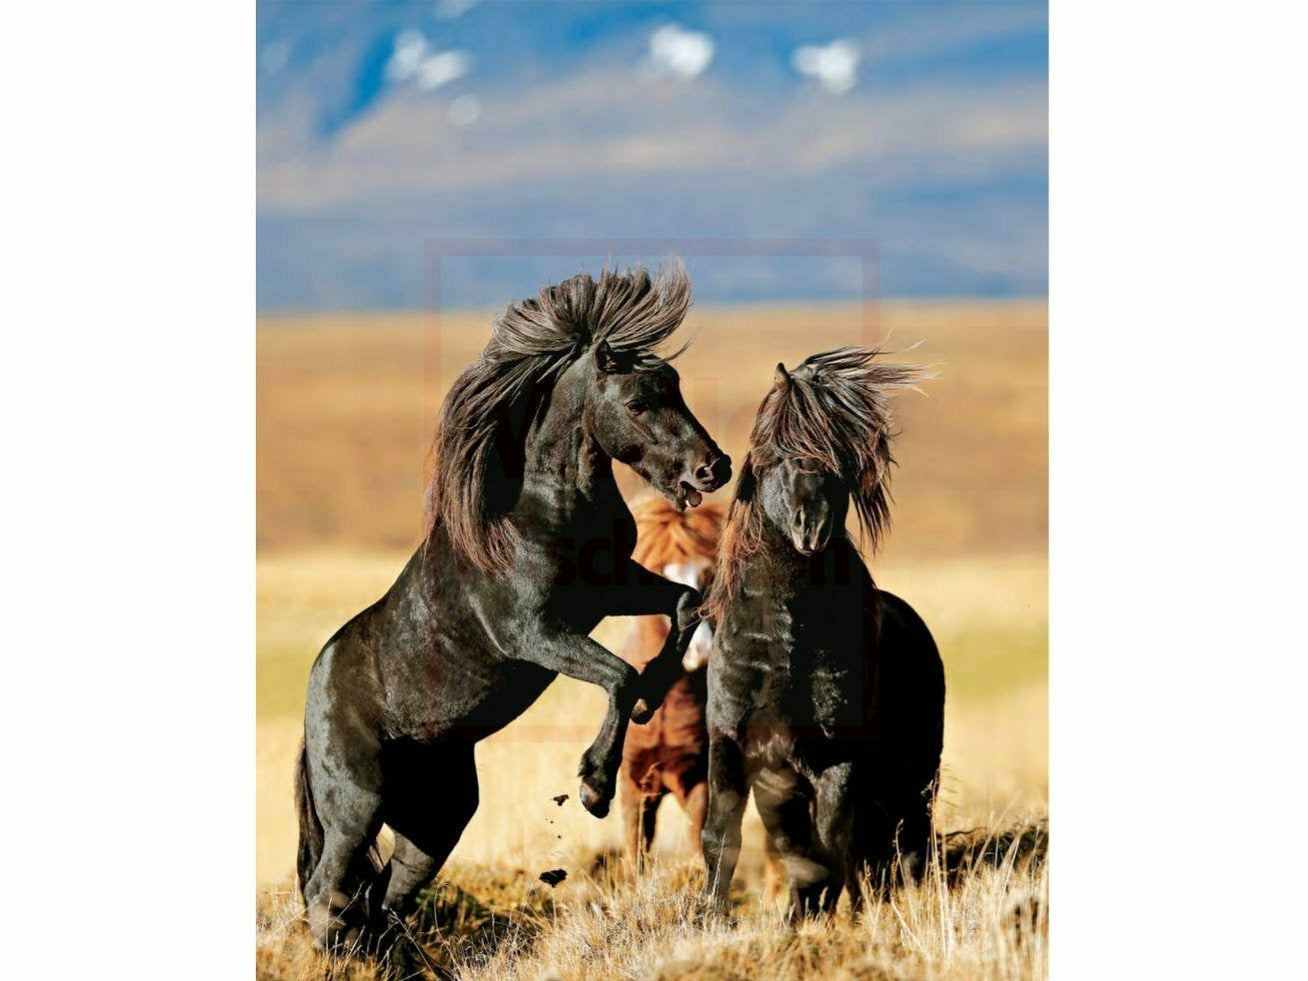 Magical Icelandic Horses - A declaration of love for horses, country and people